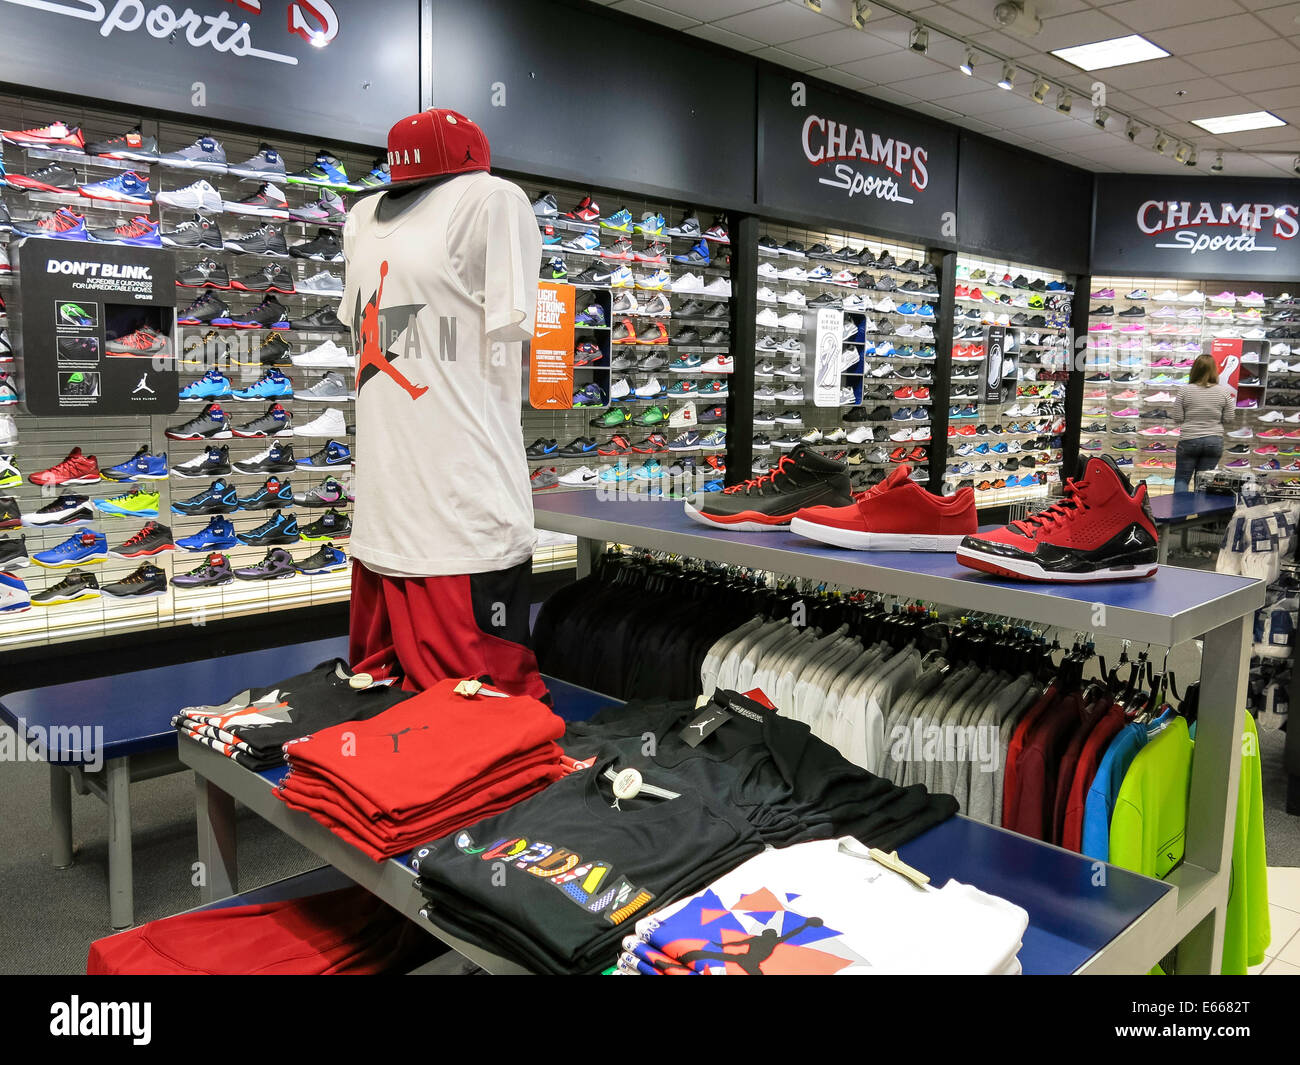 Clothing  Champs Sports